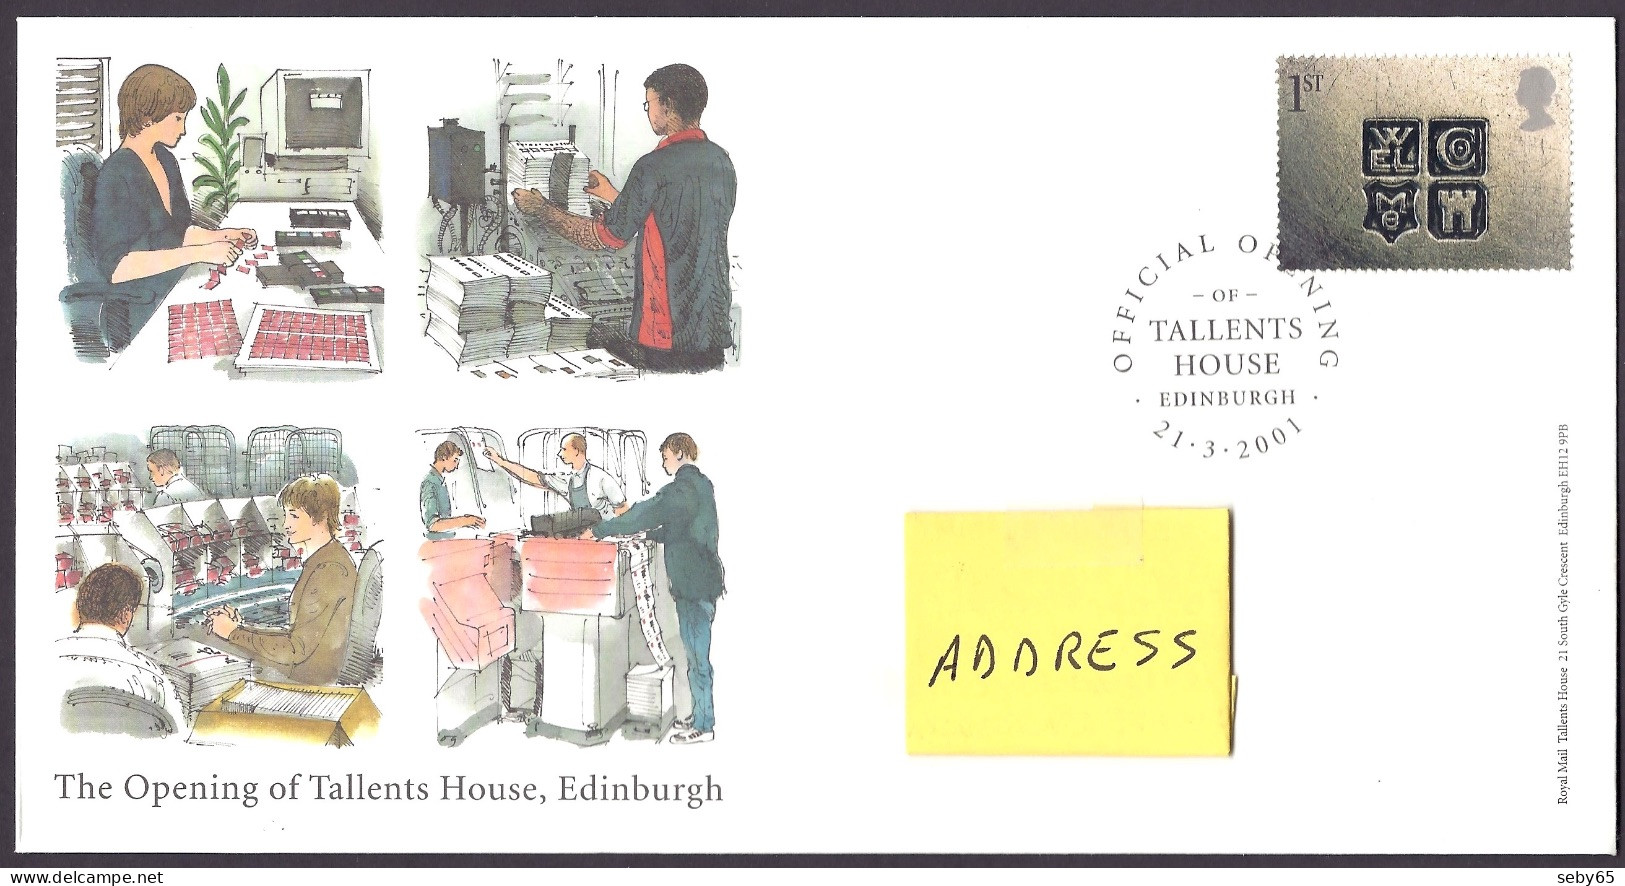 Great Britain 2001 - The Opening Of Tallents House, Edinburgh, Philatelic Office, Postal Service - FDC First Day Cover - 2001-2010 Decimal Issues